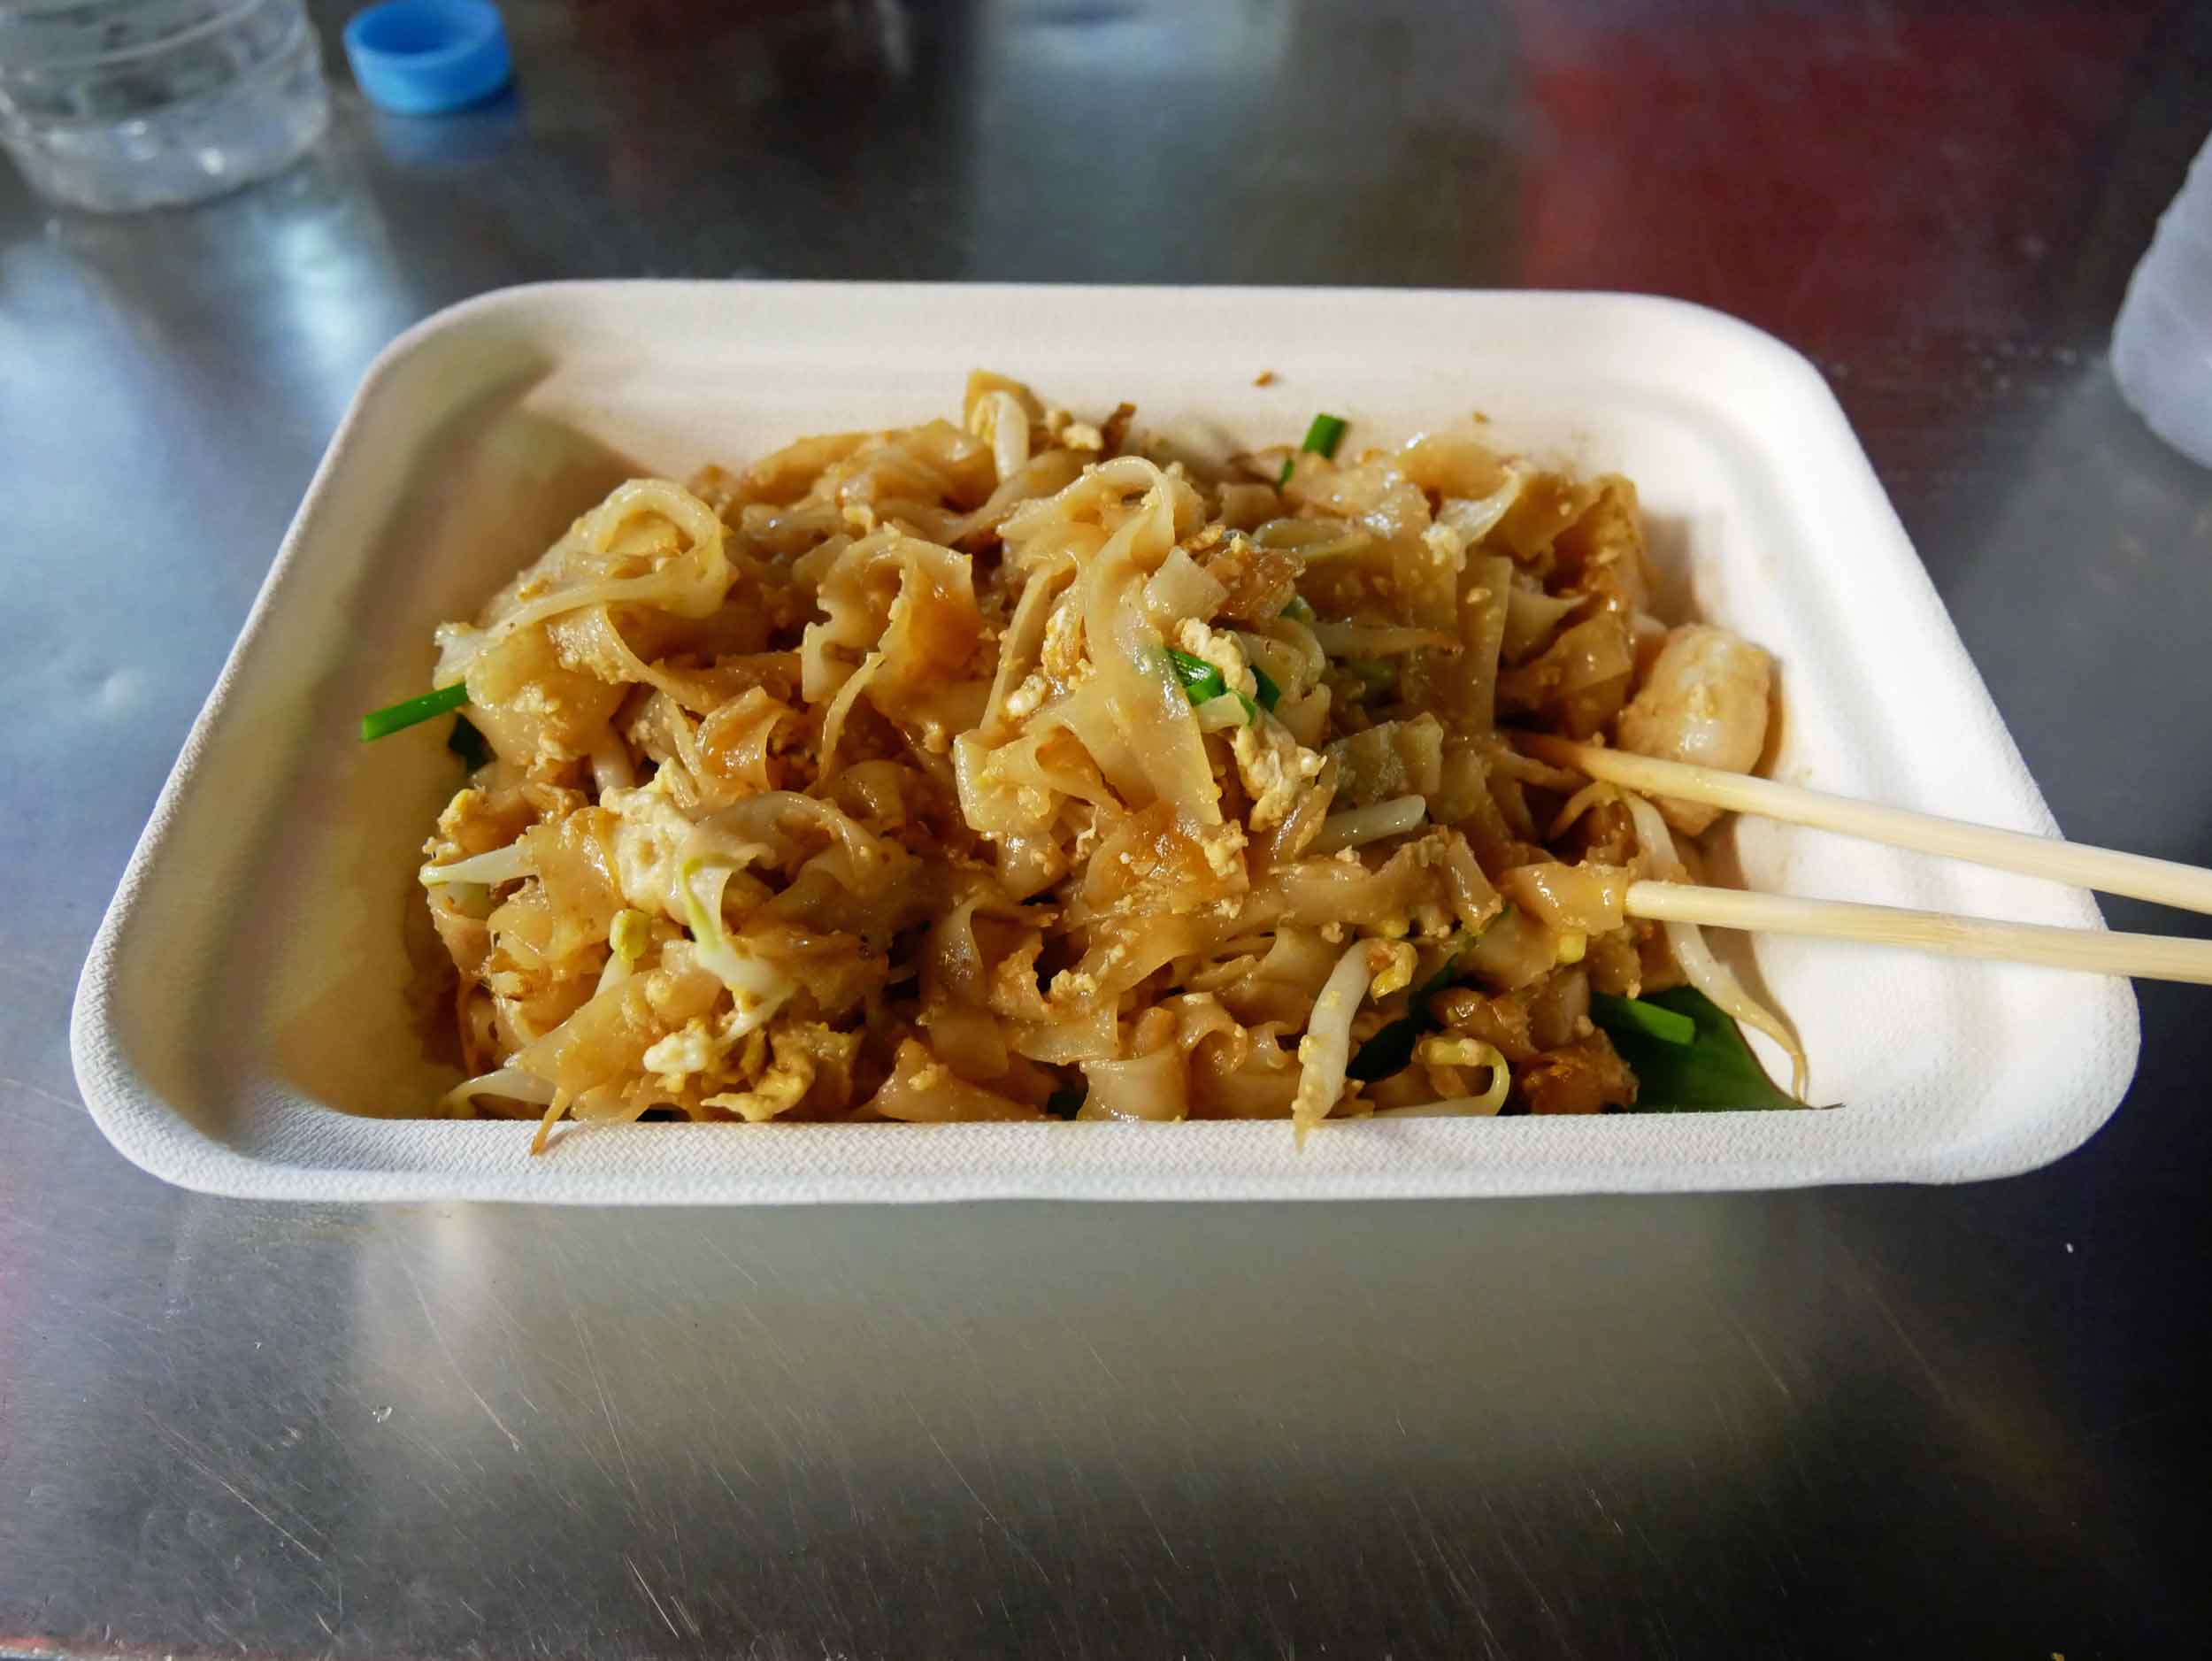  A dish of Gurney's  char kway teow , a Pad Thai-like dish of rice noodles fried with shrimp, green onions, sprouts and egg in a wok.&nbsp; 